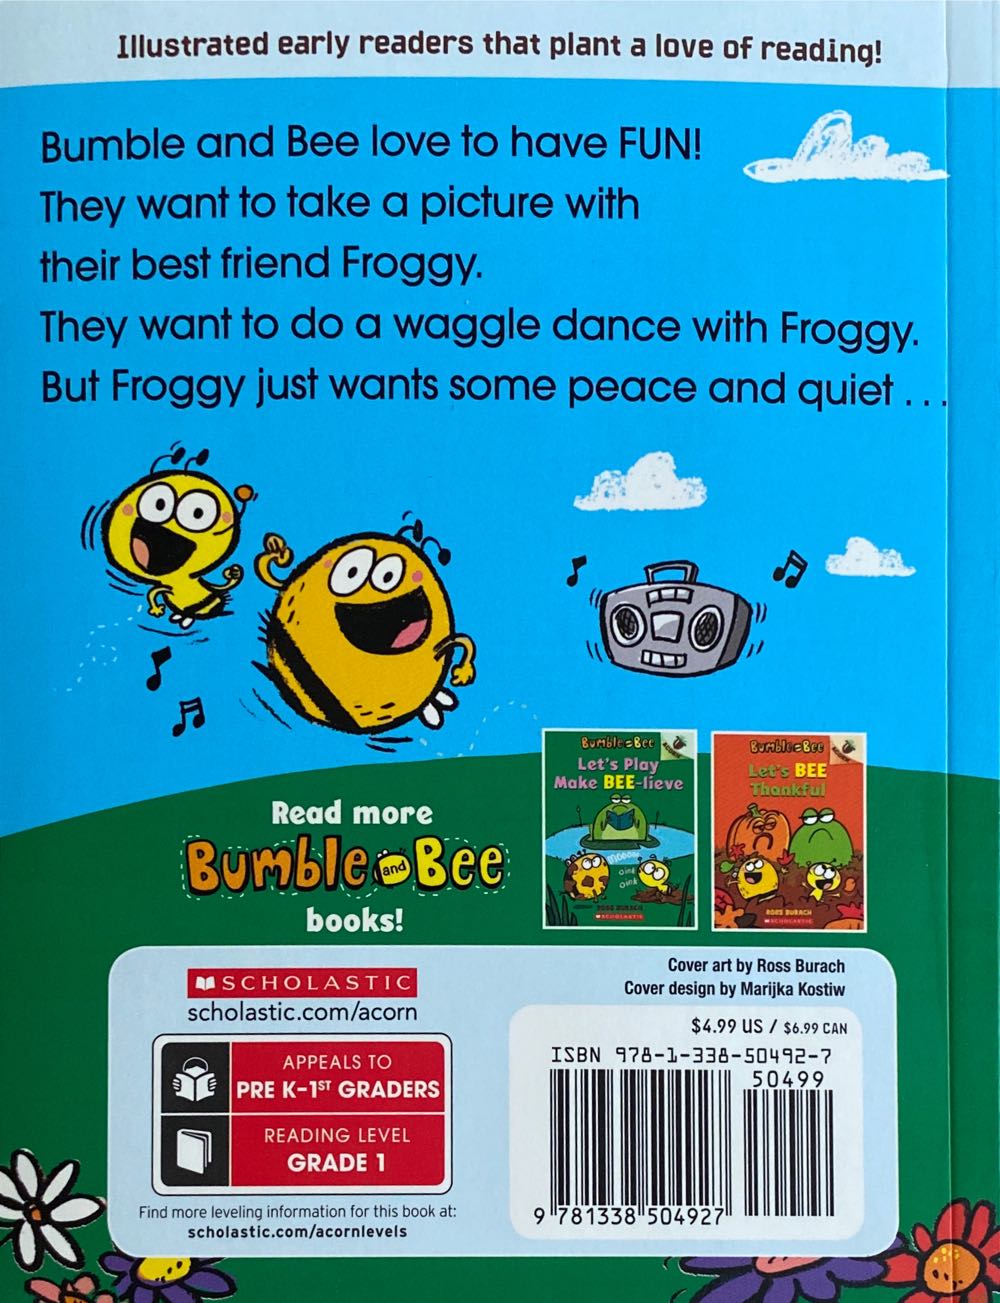 Don’t Worry, Bee Happy - Ross Burach (Bumble and Bee - Paperback) book collectible [Barcode 9781338504927] - Main Image 2